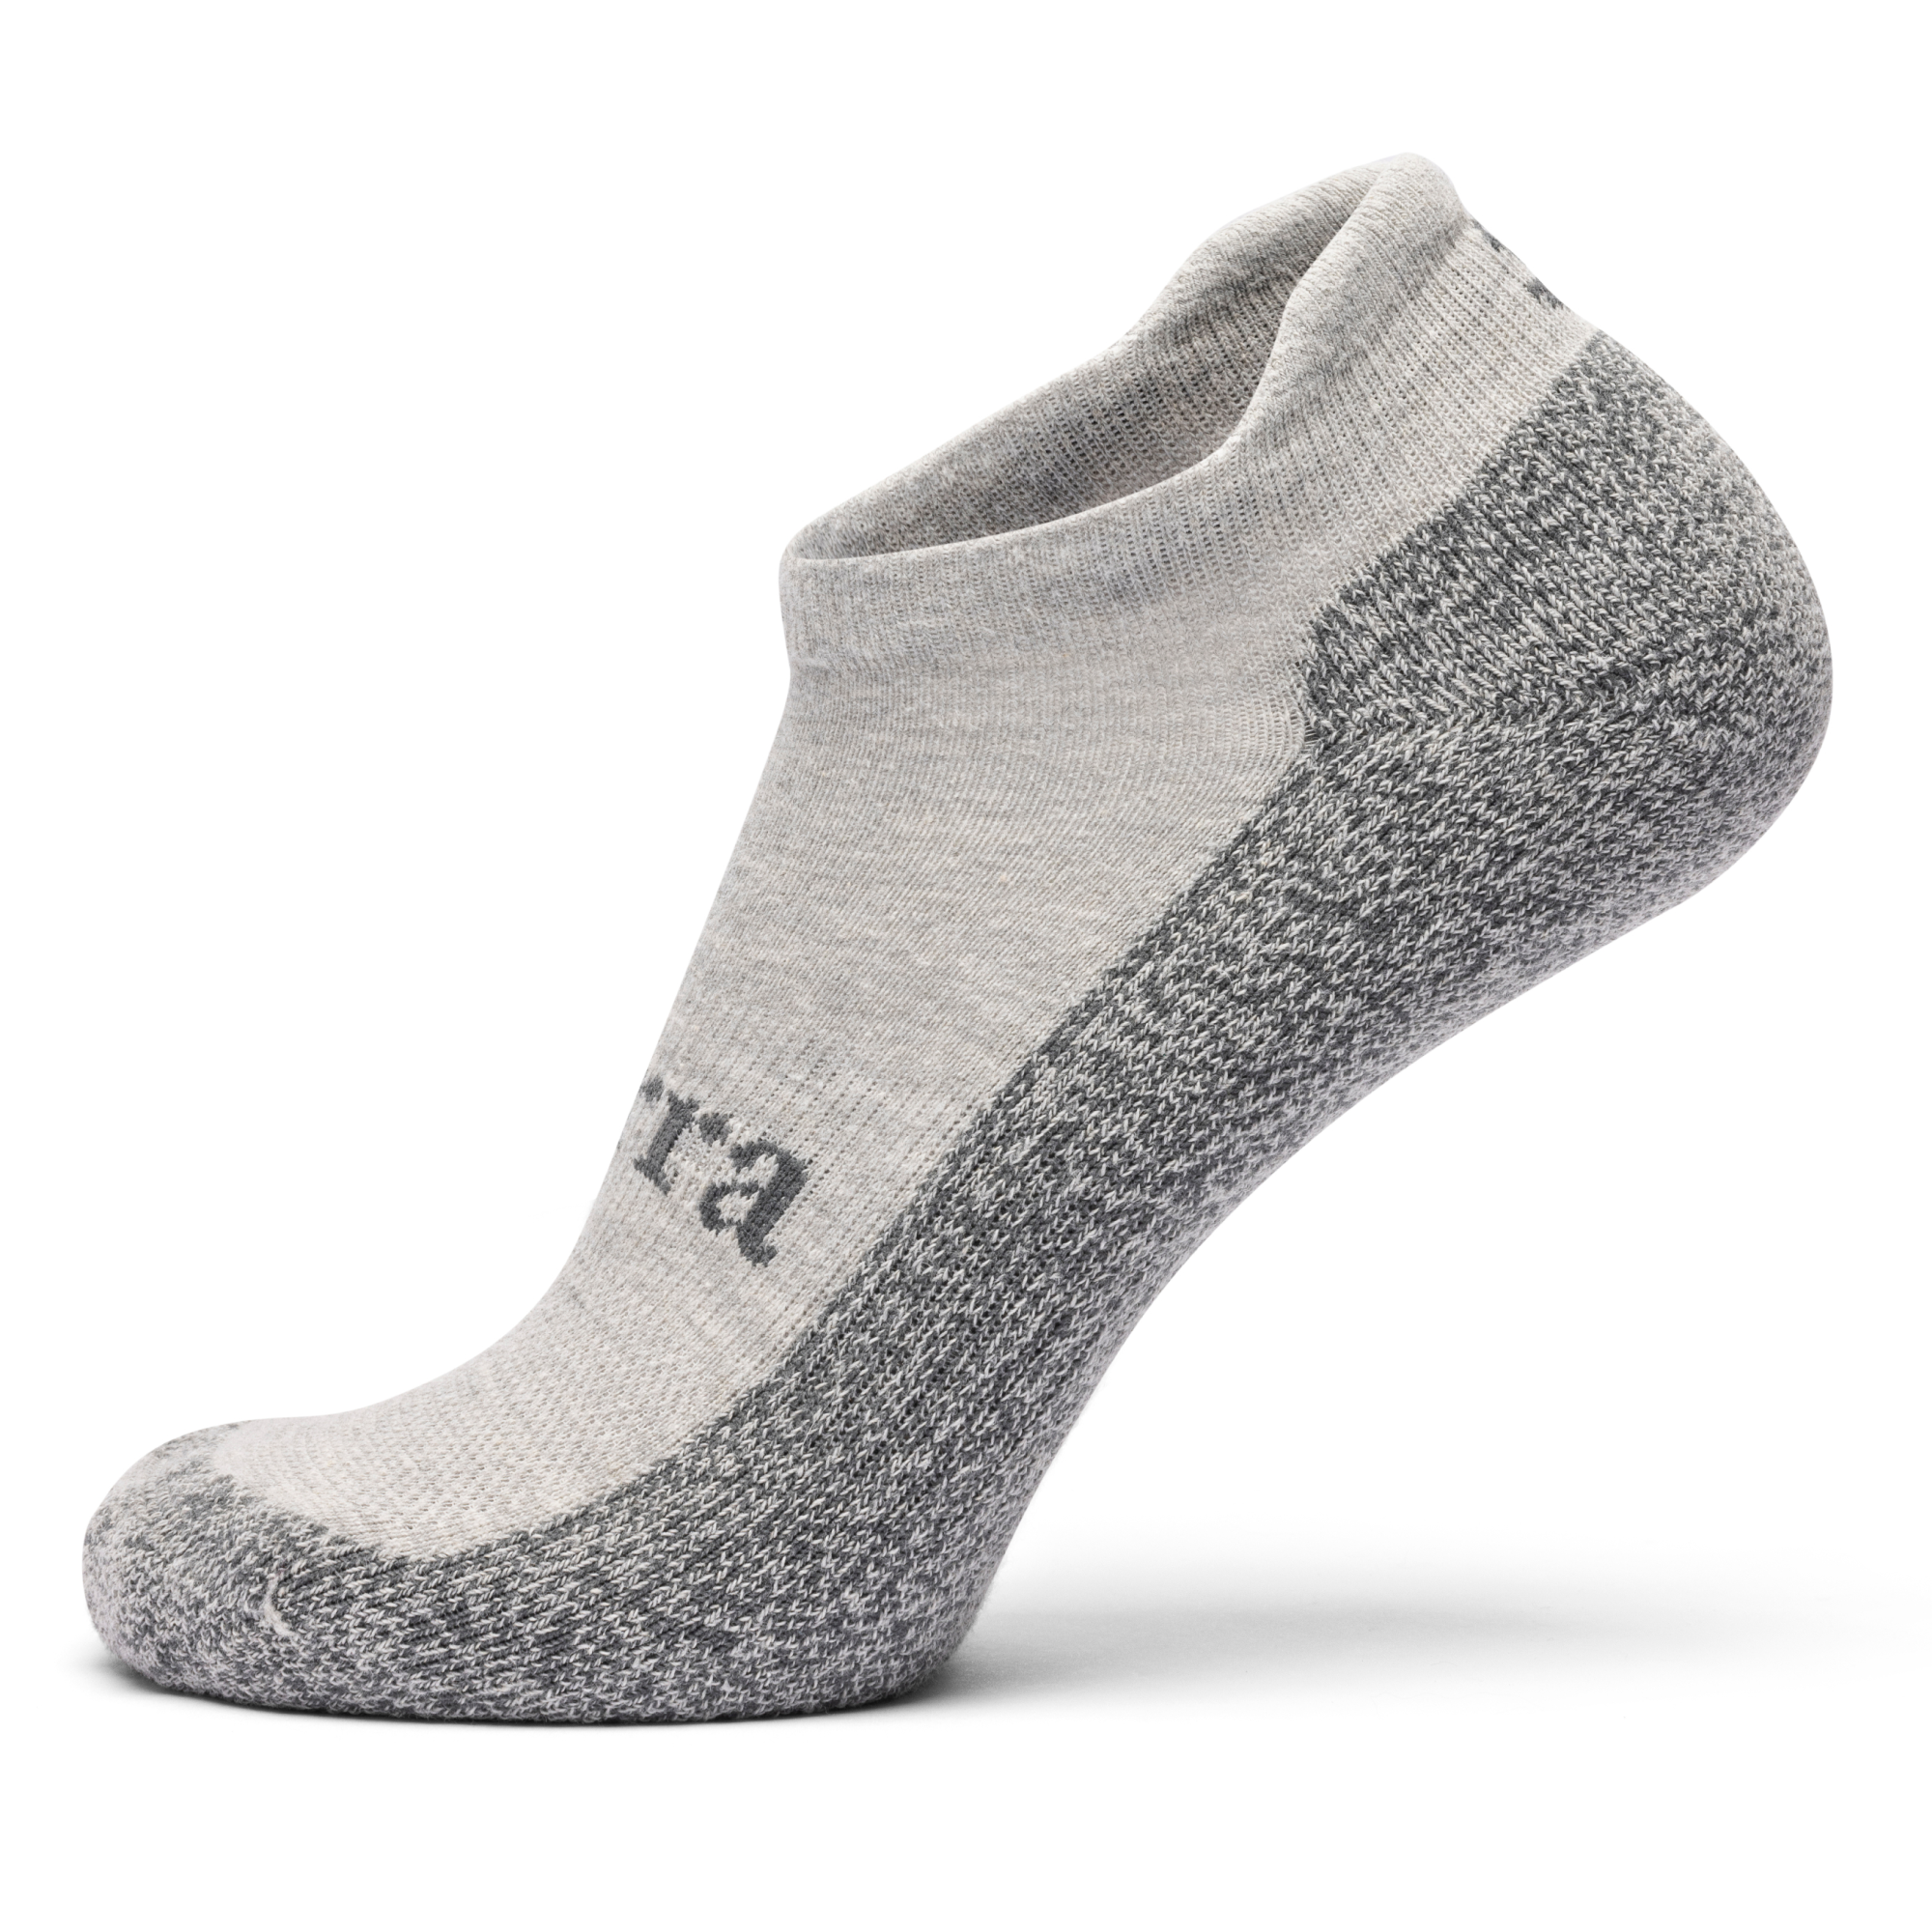 One single light and dark grey Purra No Show sock is shown it is standing on its toe.  The image calls out all the technical elements of the sock using hot spot icons